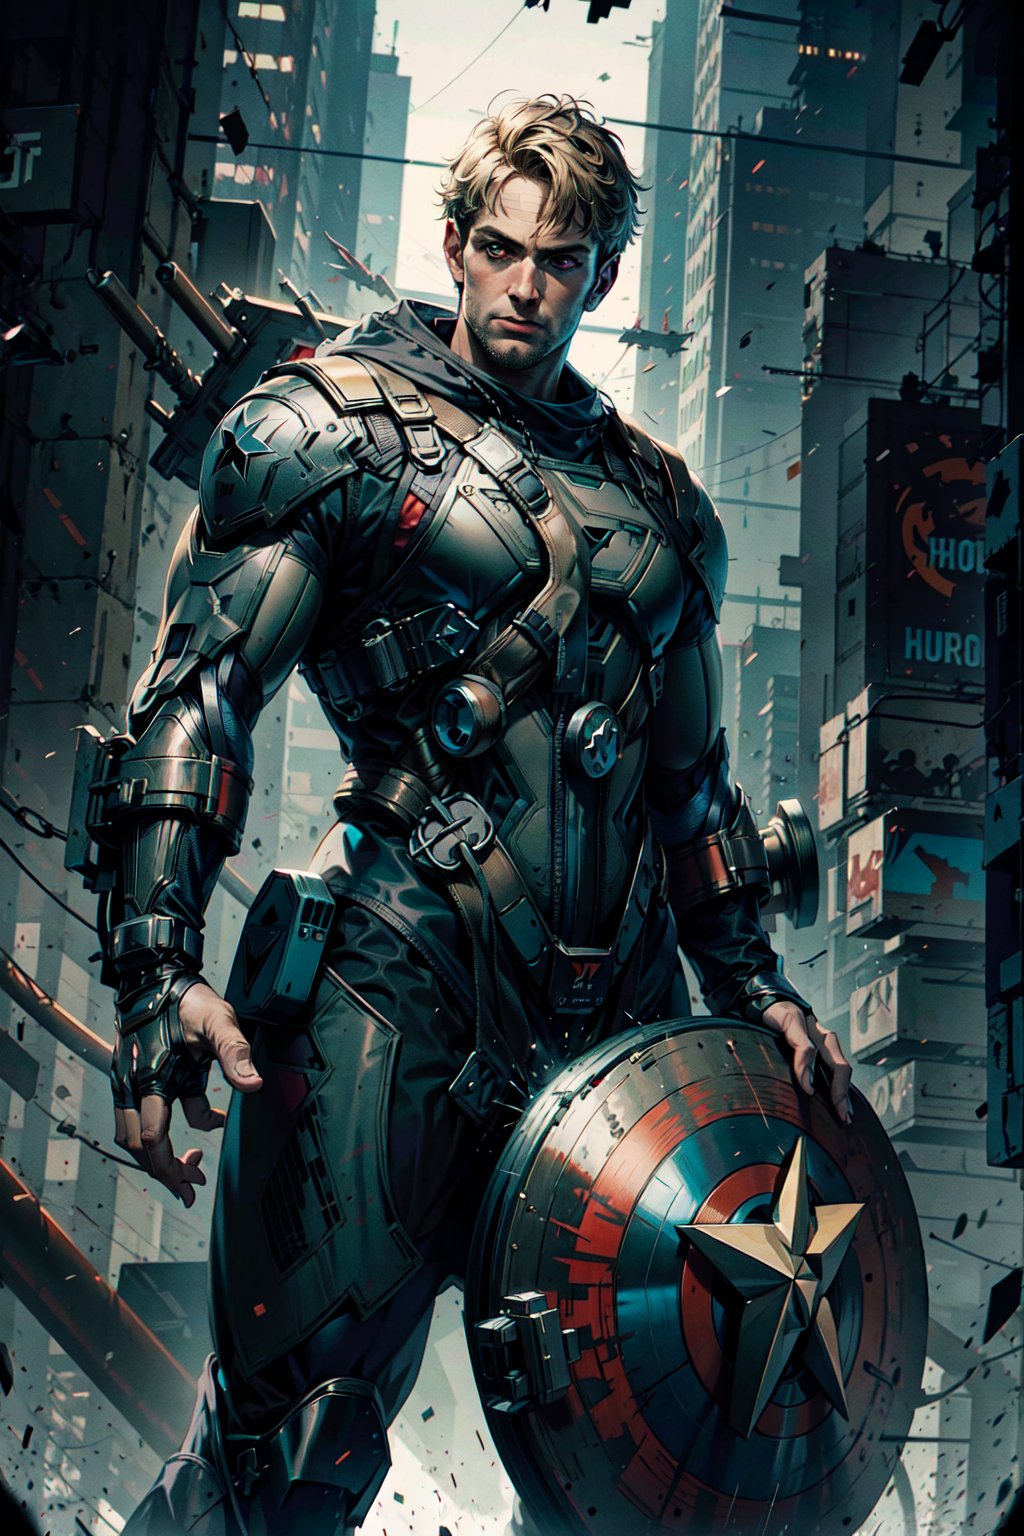 Captain America, cyberpunk, armour suit, holding shield on left hand, holding Thor hammer on right hand, dynamic pose